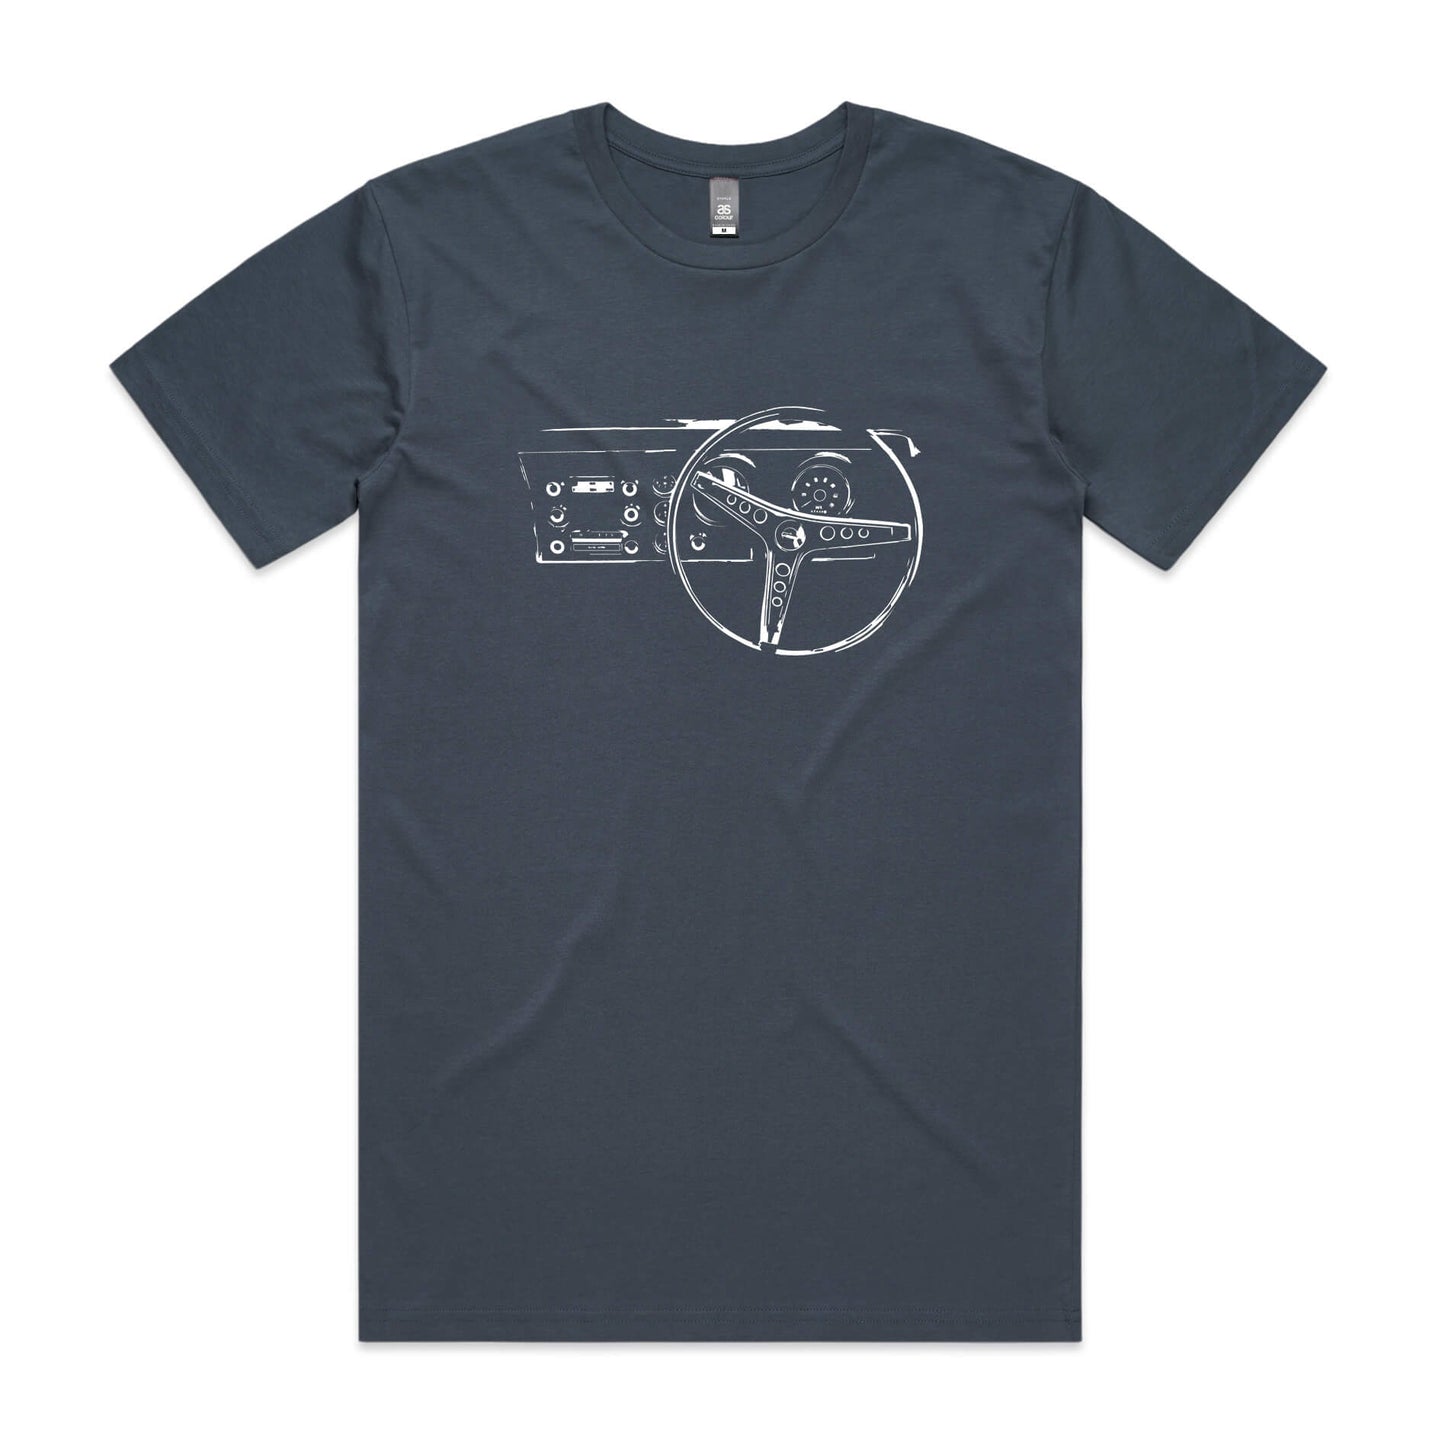 Falcon dash t-shirt in Petrol with a Ford XY Falcon dashboard printed on the front